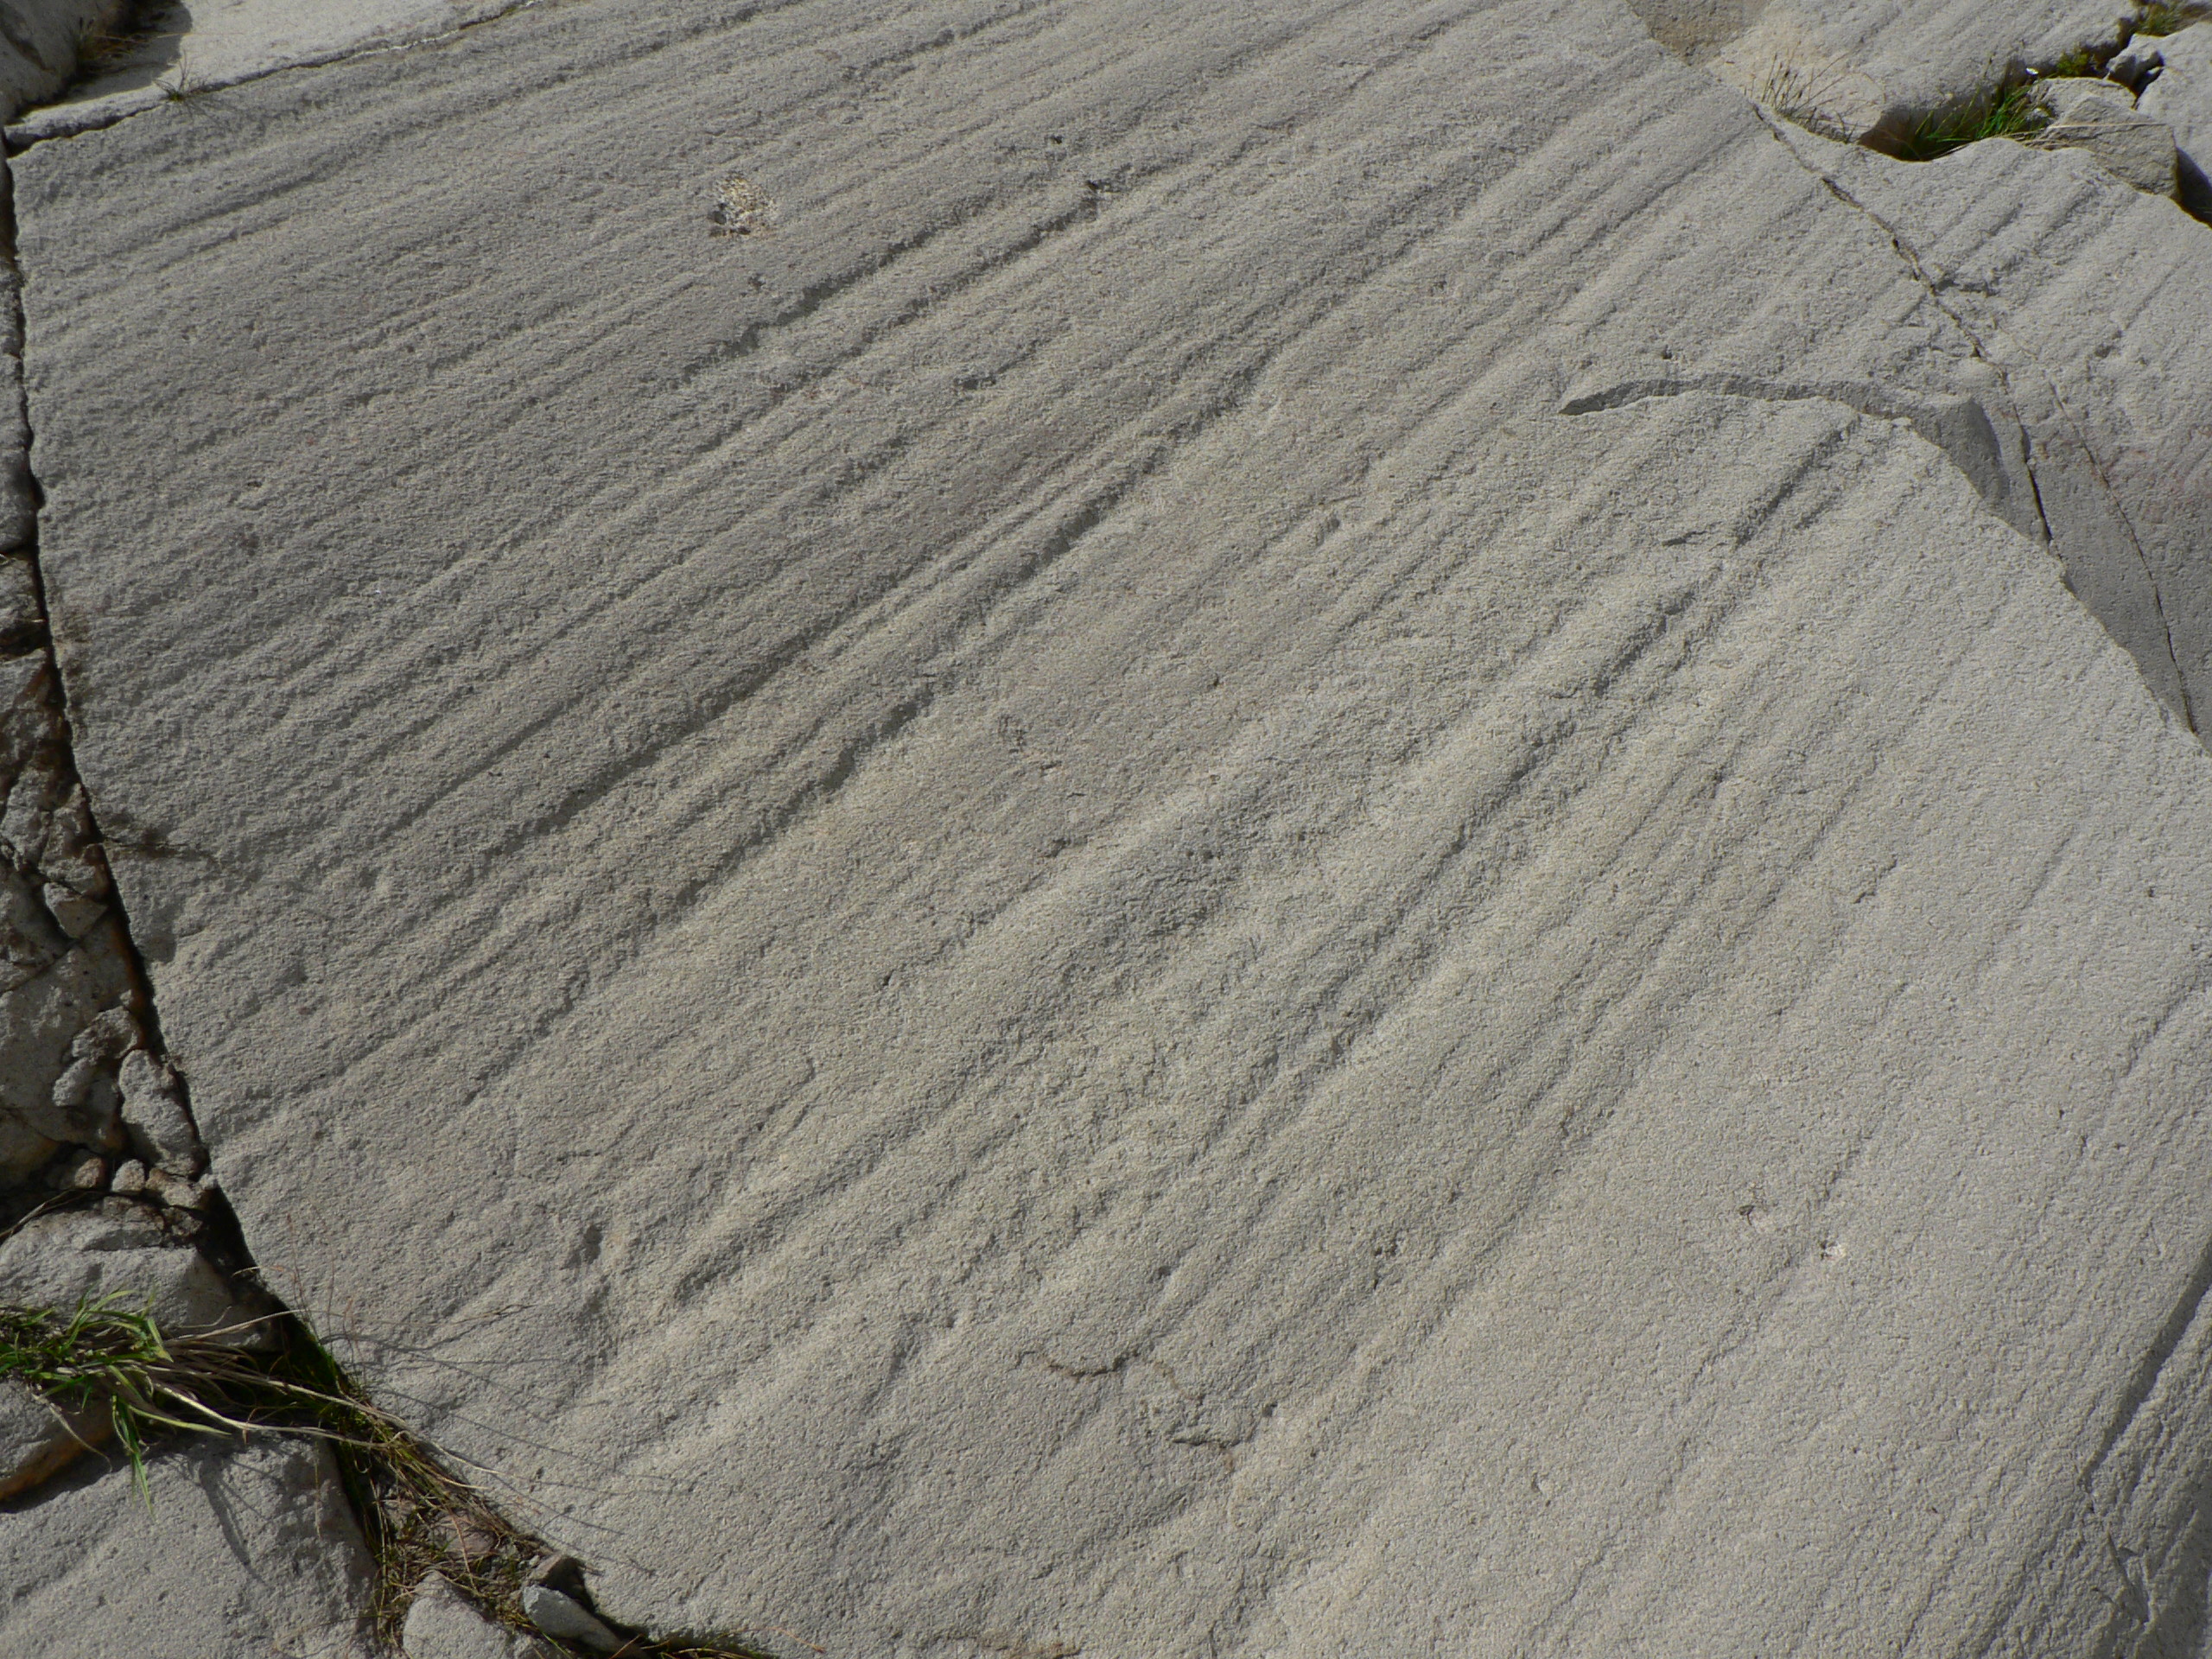 <p>Long scratches created where moraine scraped against resistant rock</p>